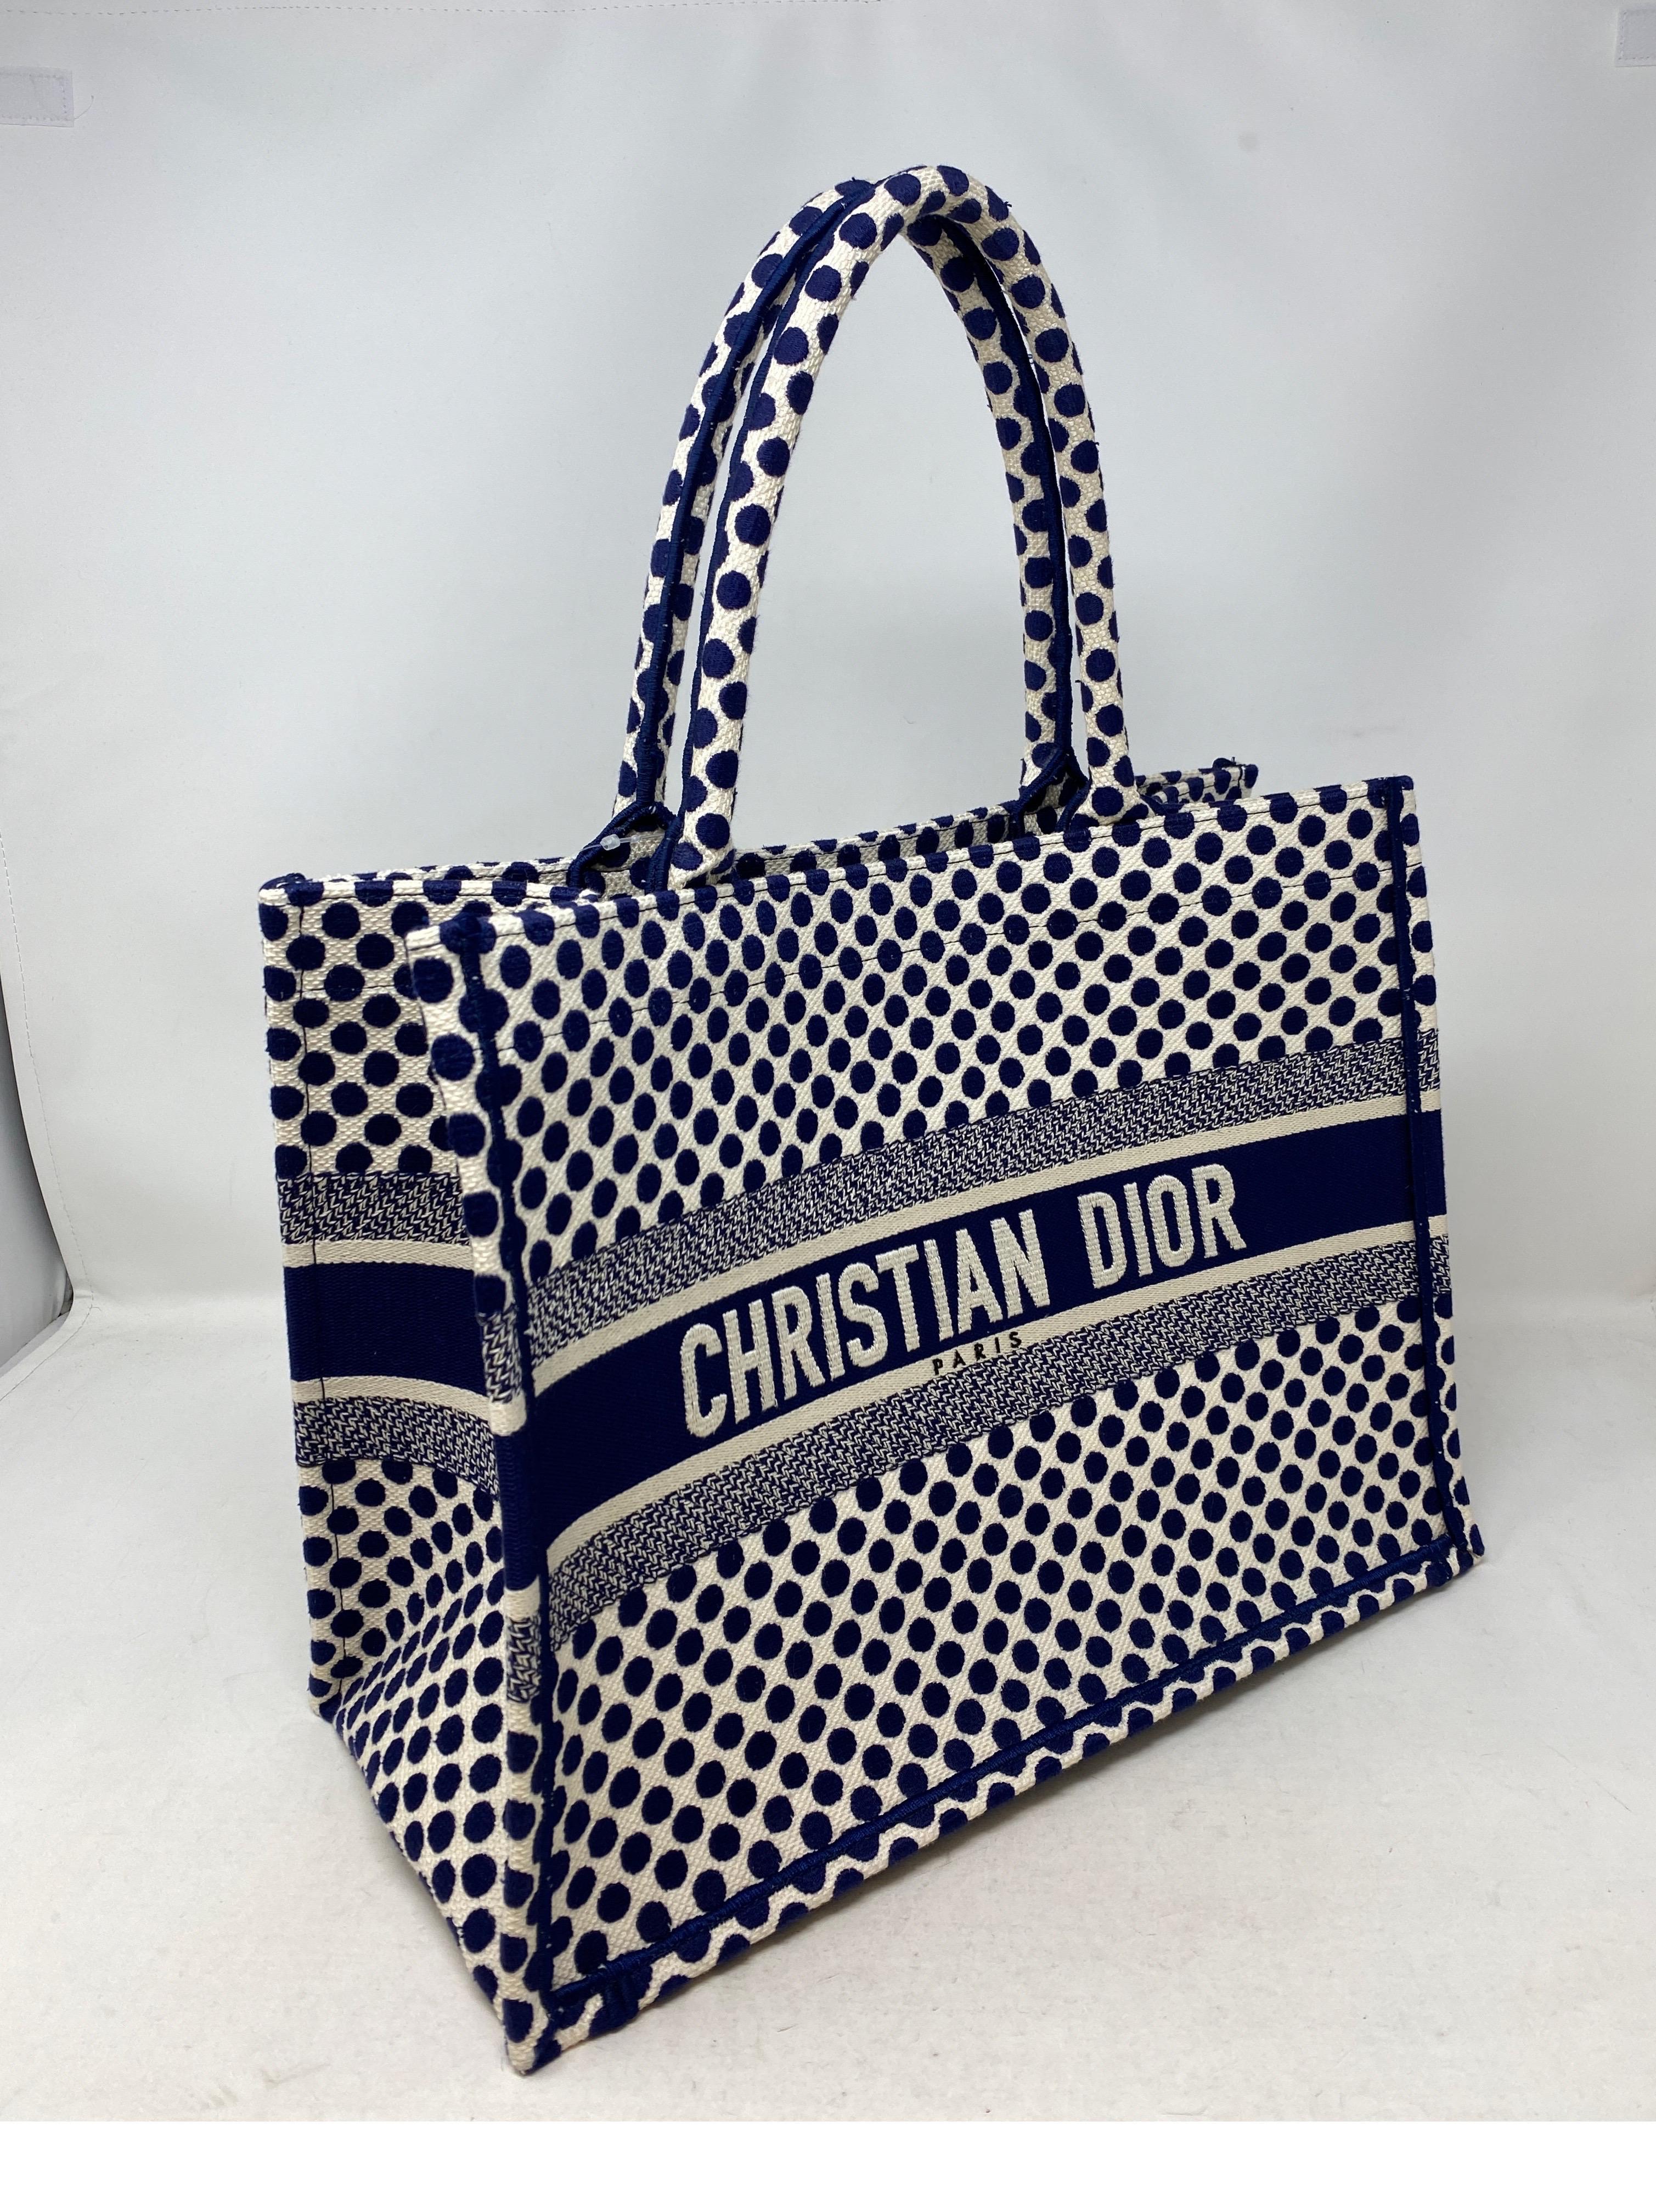 Dior Polka Dot Tote Bag. Rare polka dots. Navy and white. Medium size tote bag. Most wanted style by Dior. Excellent like new condition. Guaranteed authentic. 